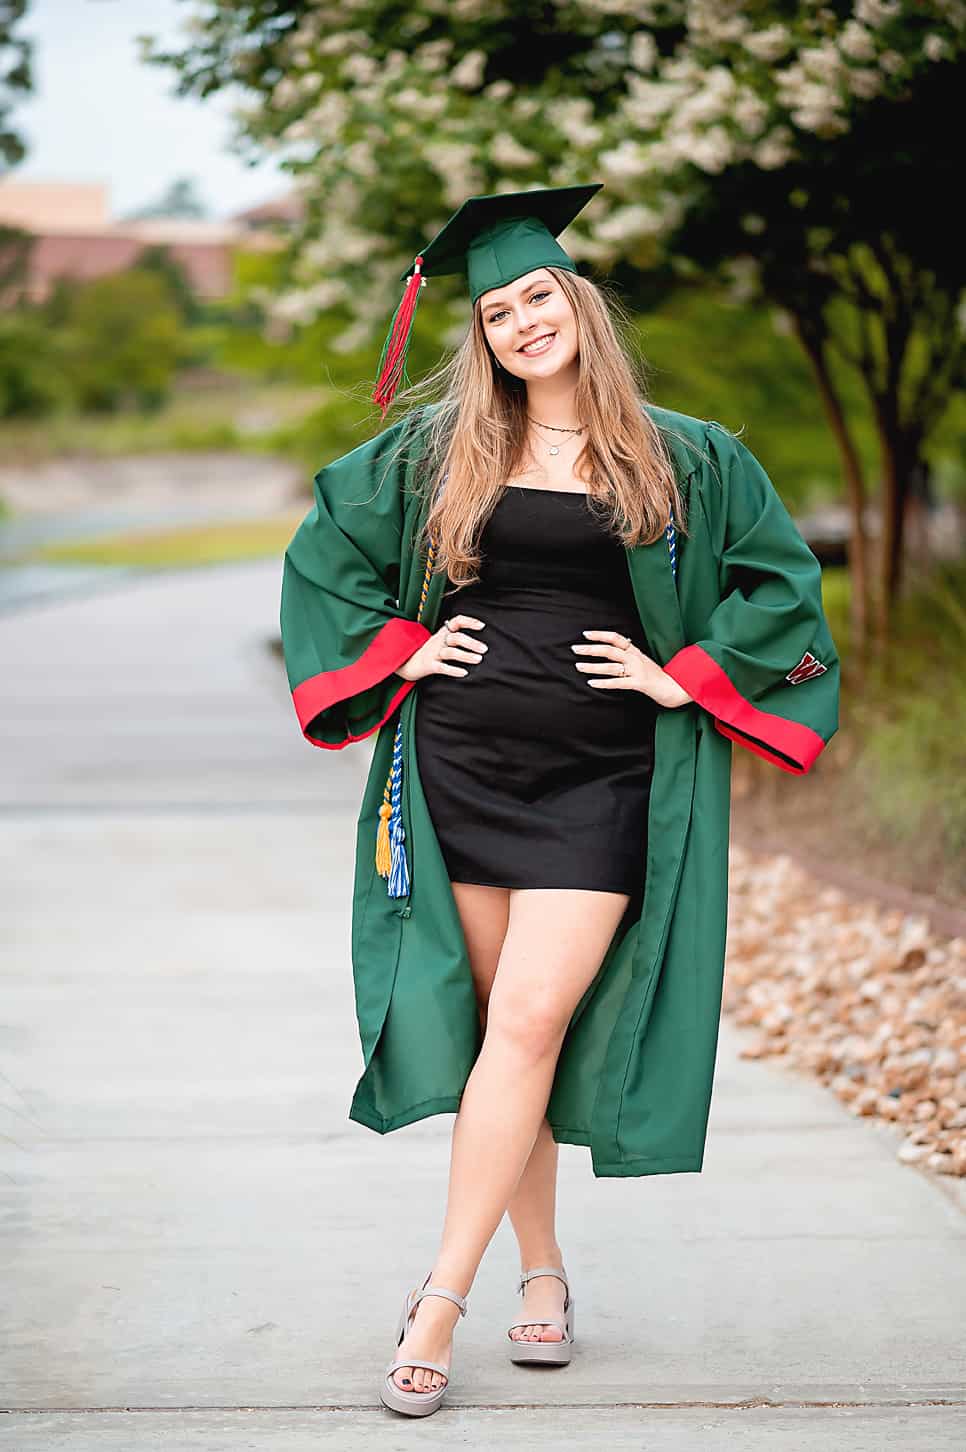 look good in cap and gown photos